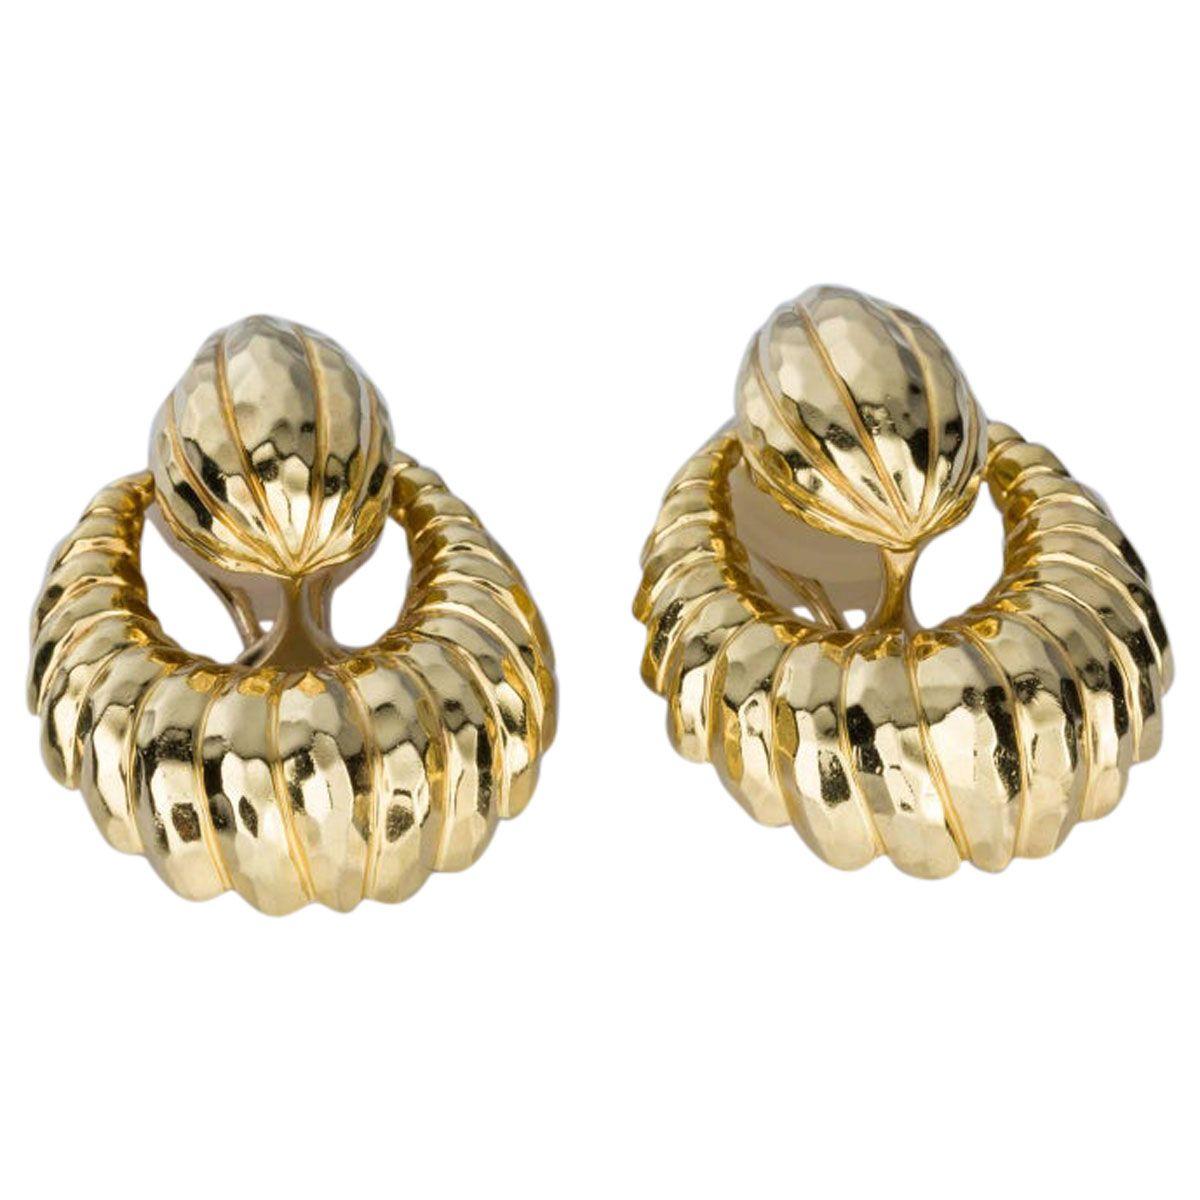 Stylish & sophisticated these 18k Yellow Gold Henry Dunay Door-Knocker Earrings are incredible. Finely made with ribbed detailing and a hammer textured finish, they have a certain 